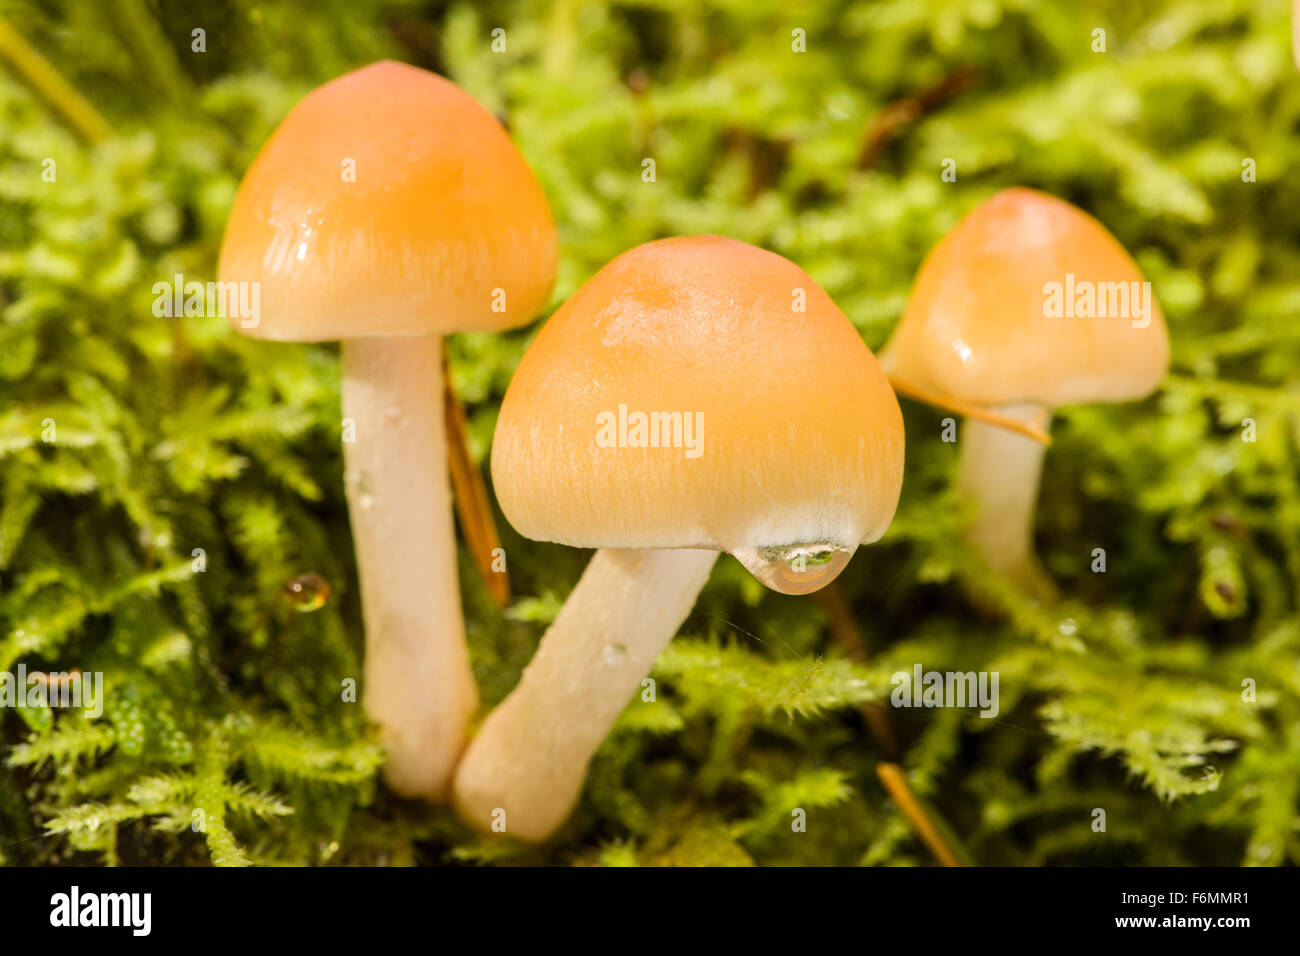 Clustered Woodlover, Sulphur Tuft or Green-gilled Woodlover (Naematoloma fasciculare) mushrooms are a poisonous fungi Stock Photo